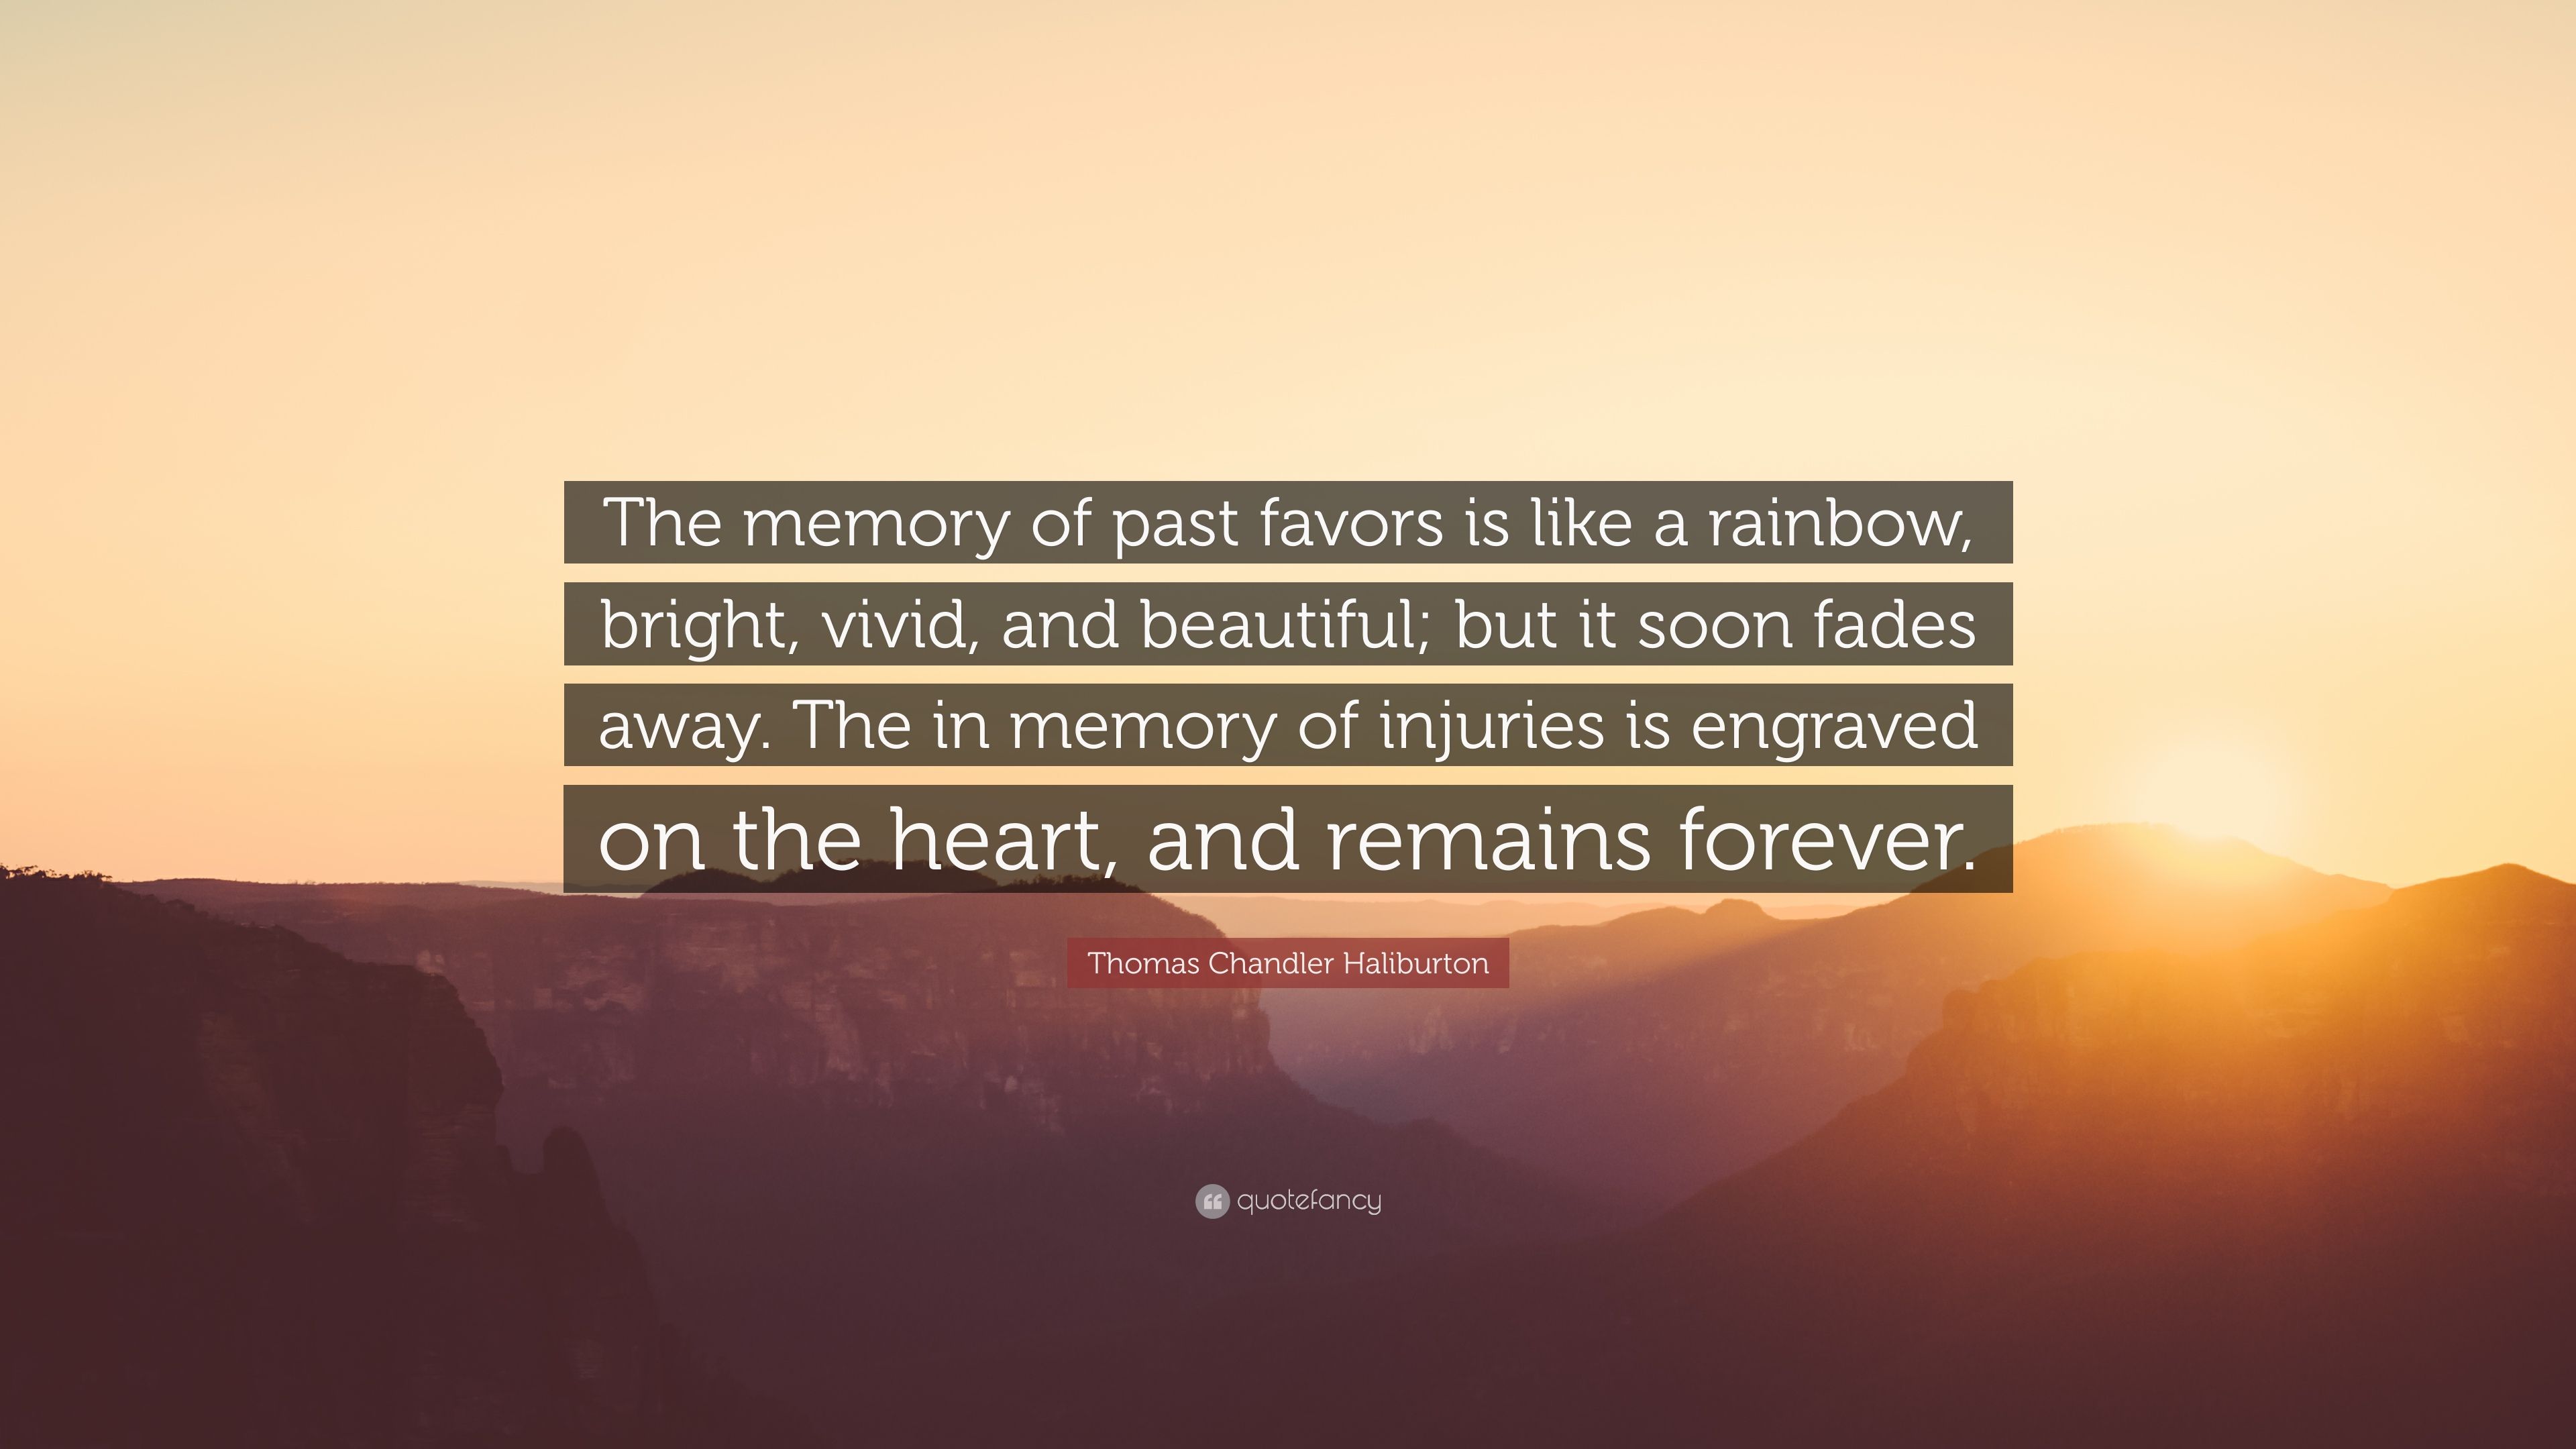 Thomas Chandler Haliburton Quote: “The memory of past favors is